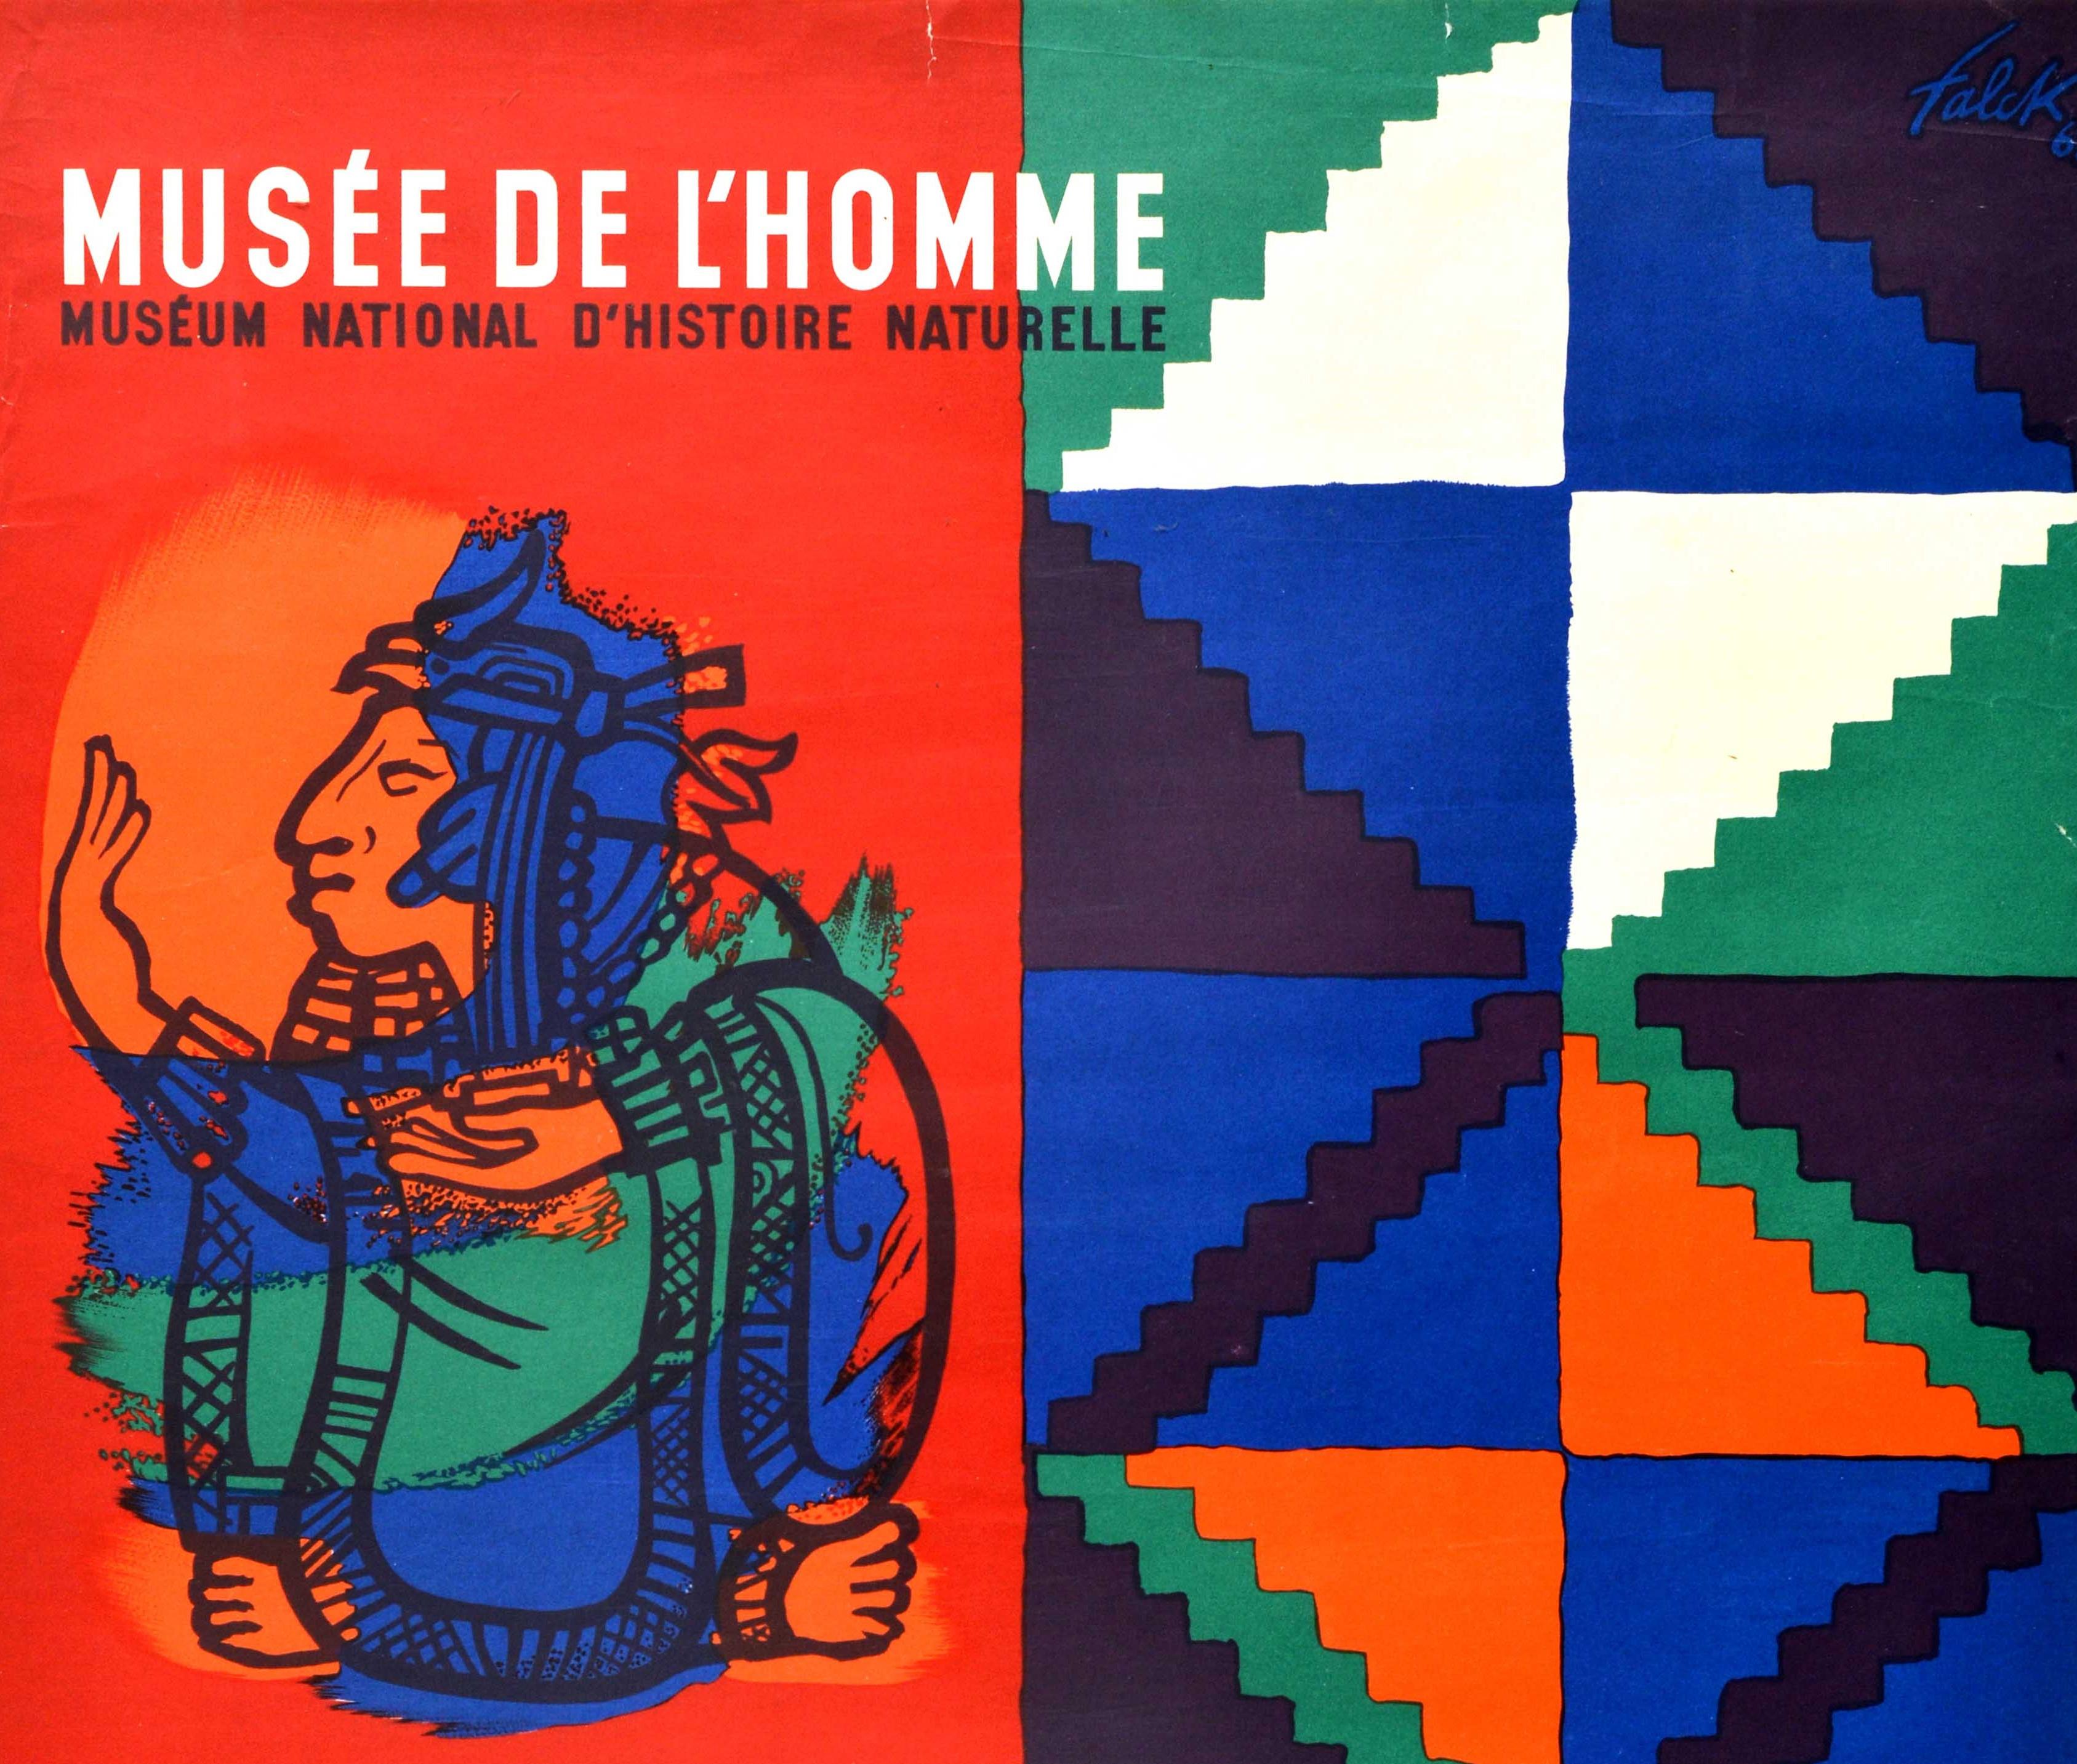 Original vintage exhibition poster for the Musee de l'Homme Museum National d'Histoire Naturelle Costumes Maya d'aujourd'hui / Museum of Man National Museum of Natural History Mayan Costumes Today featuring a colorful design by Jarl Falck